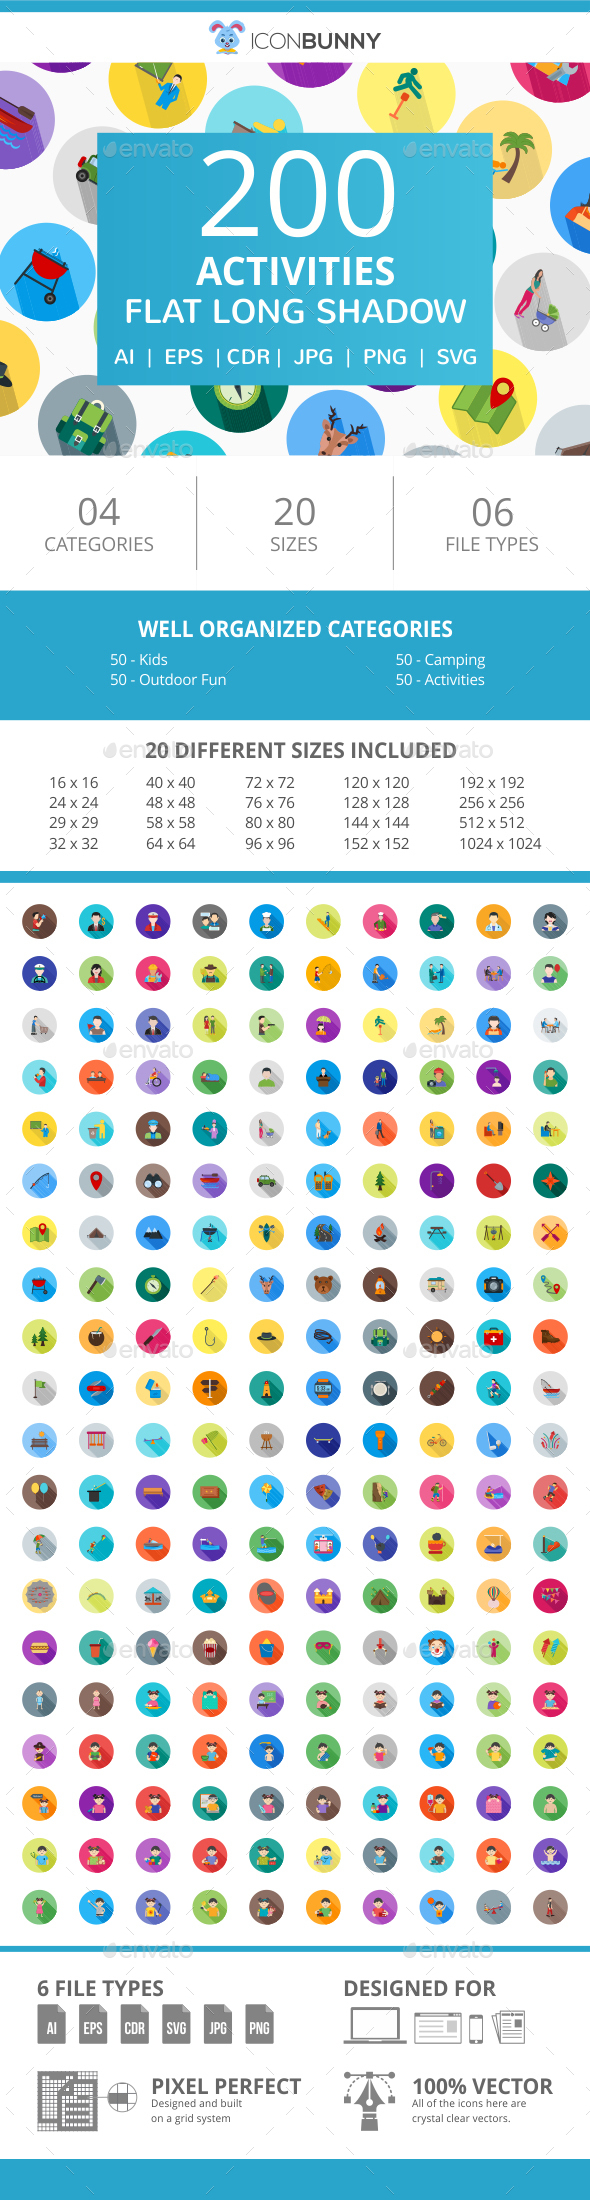 200 Activities Flat Long Shadow Icons By Iconbunny Graphicriver